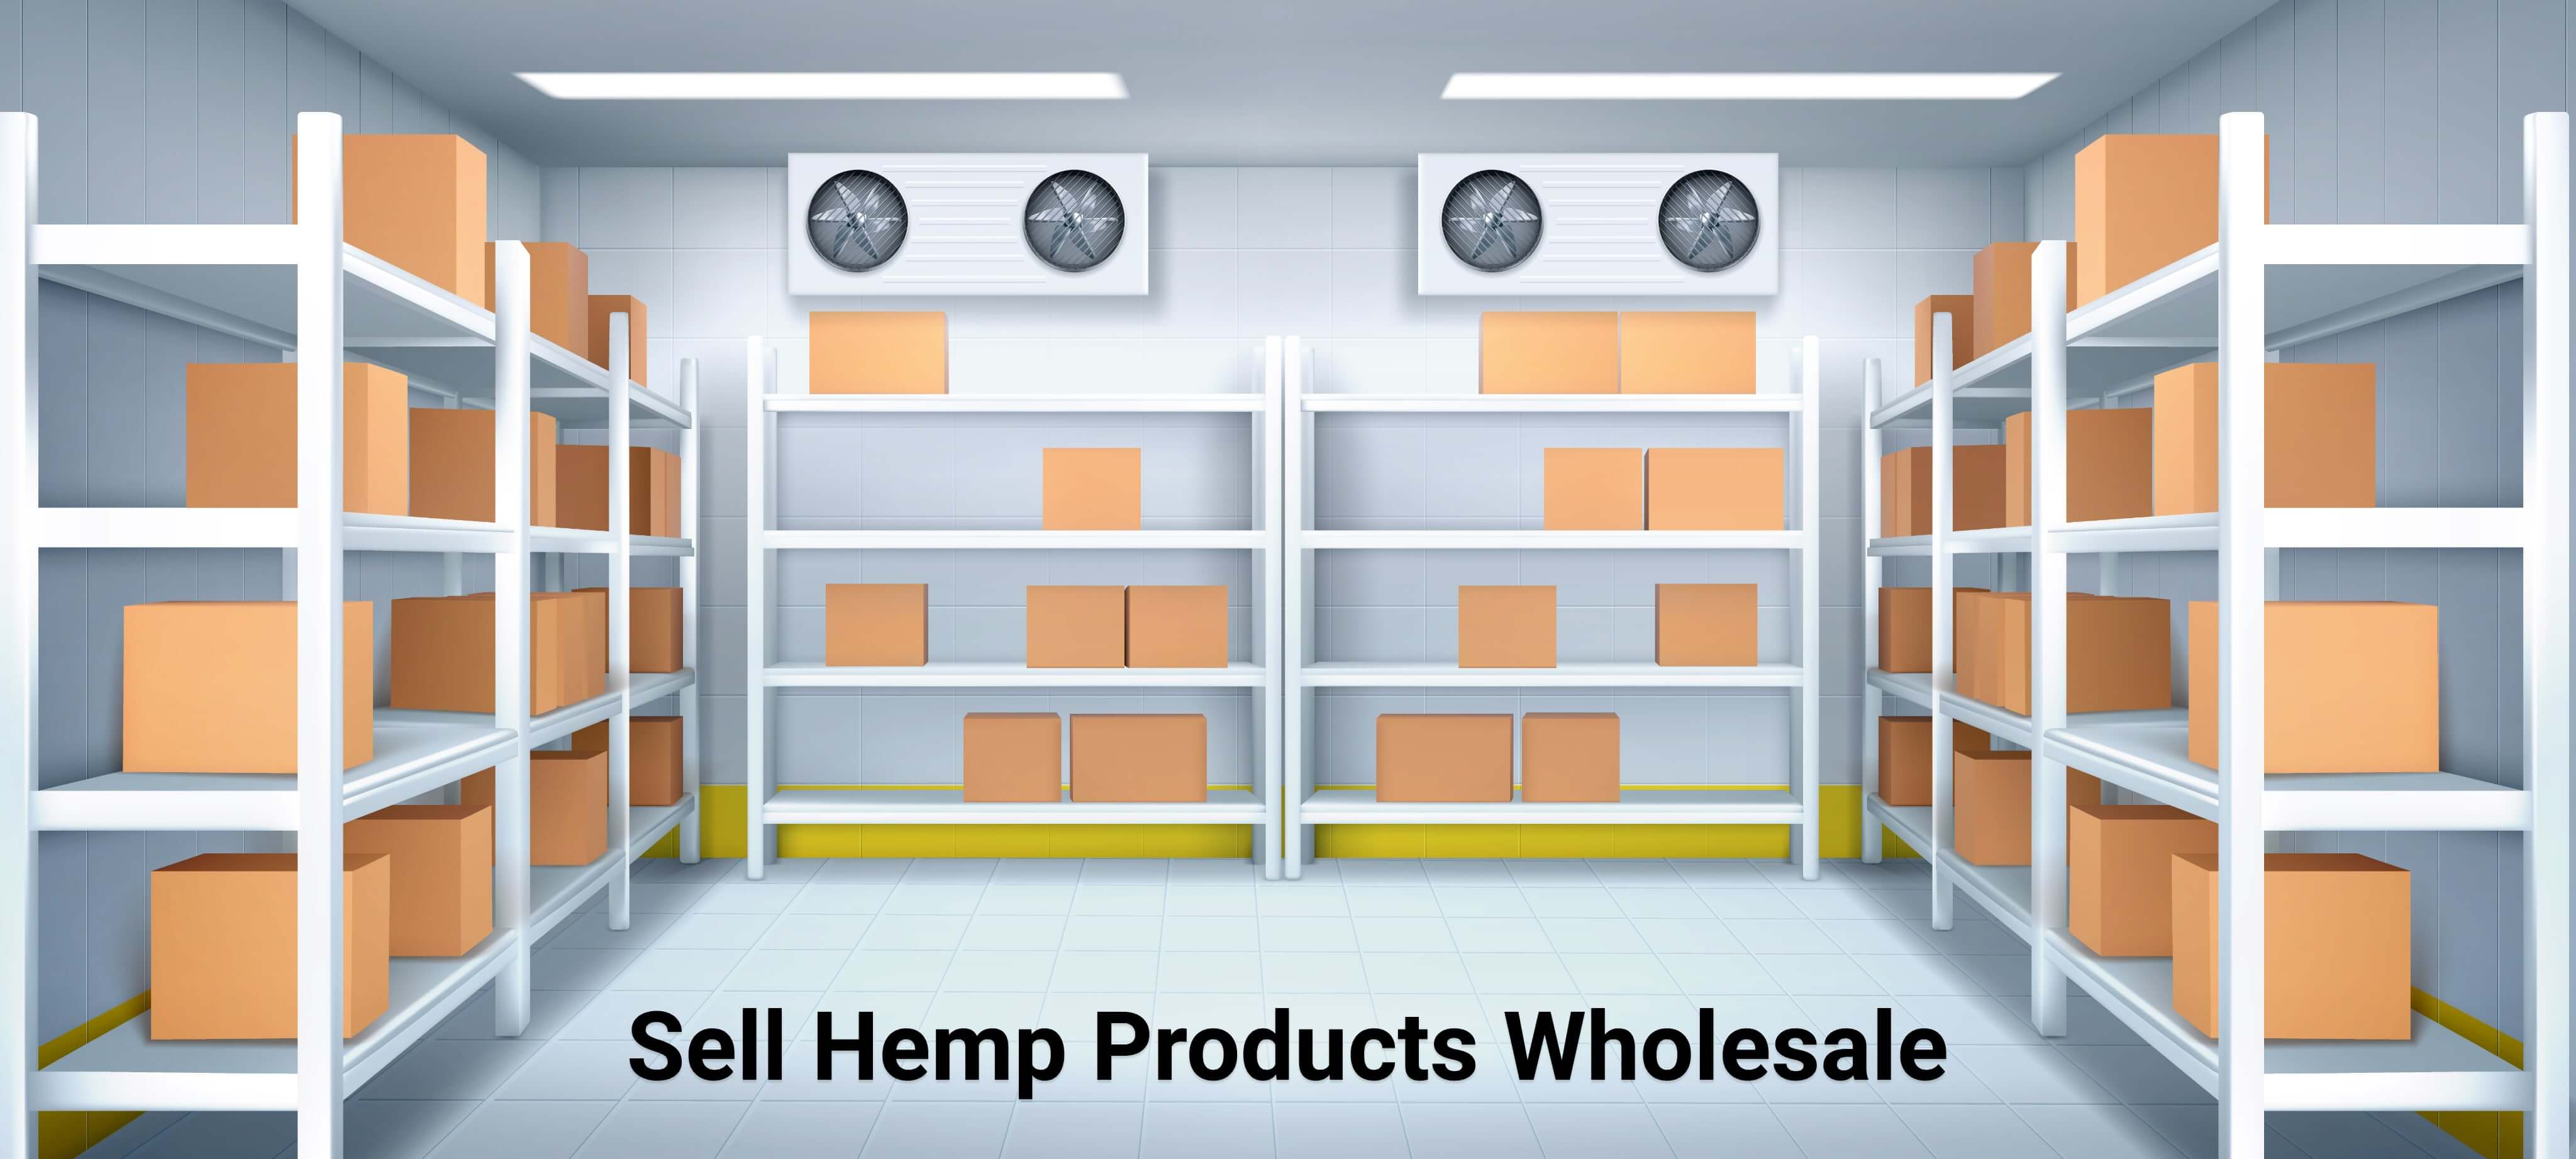 How to Sell Hemp Products Wholesale – Starting a CBD Business